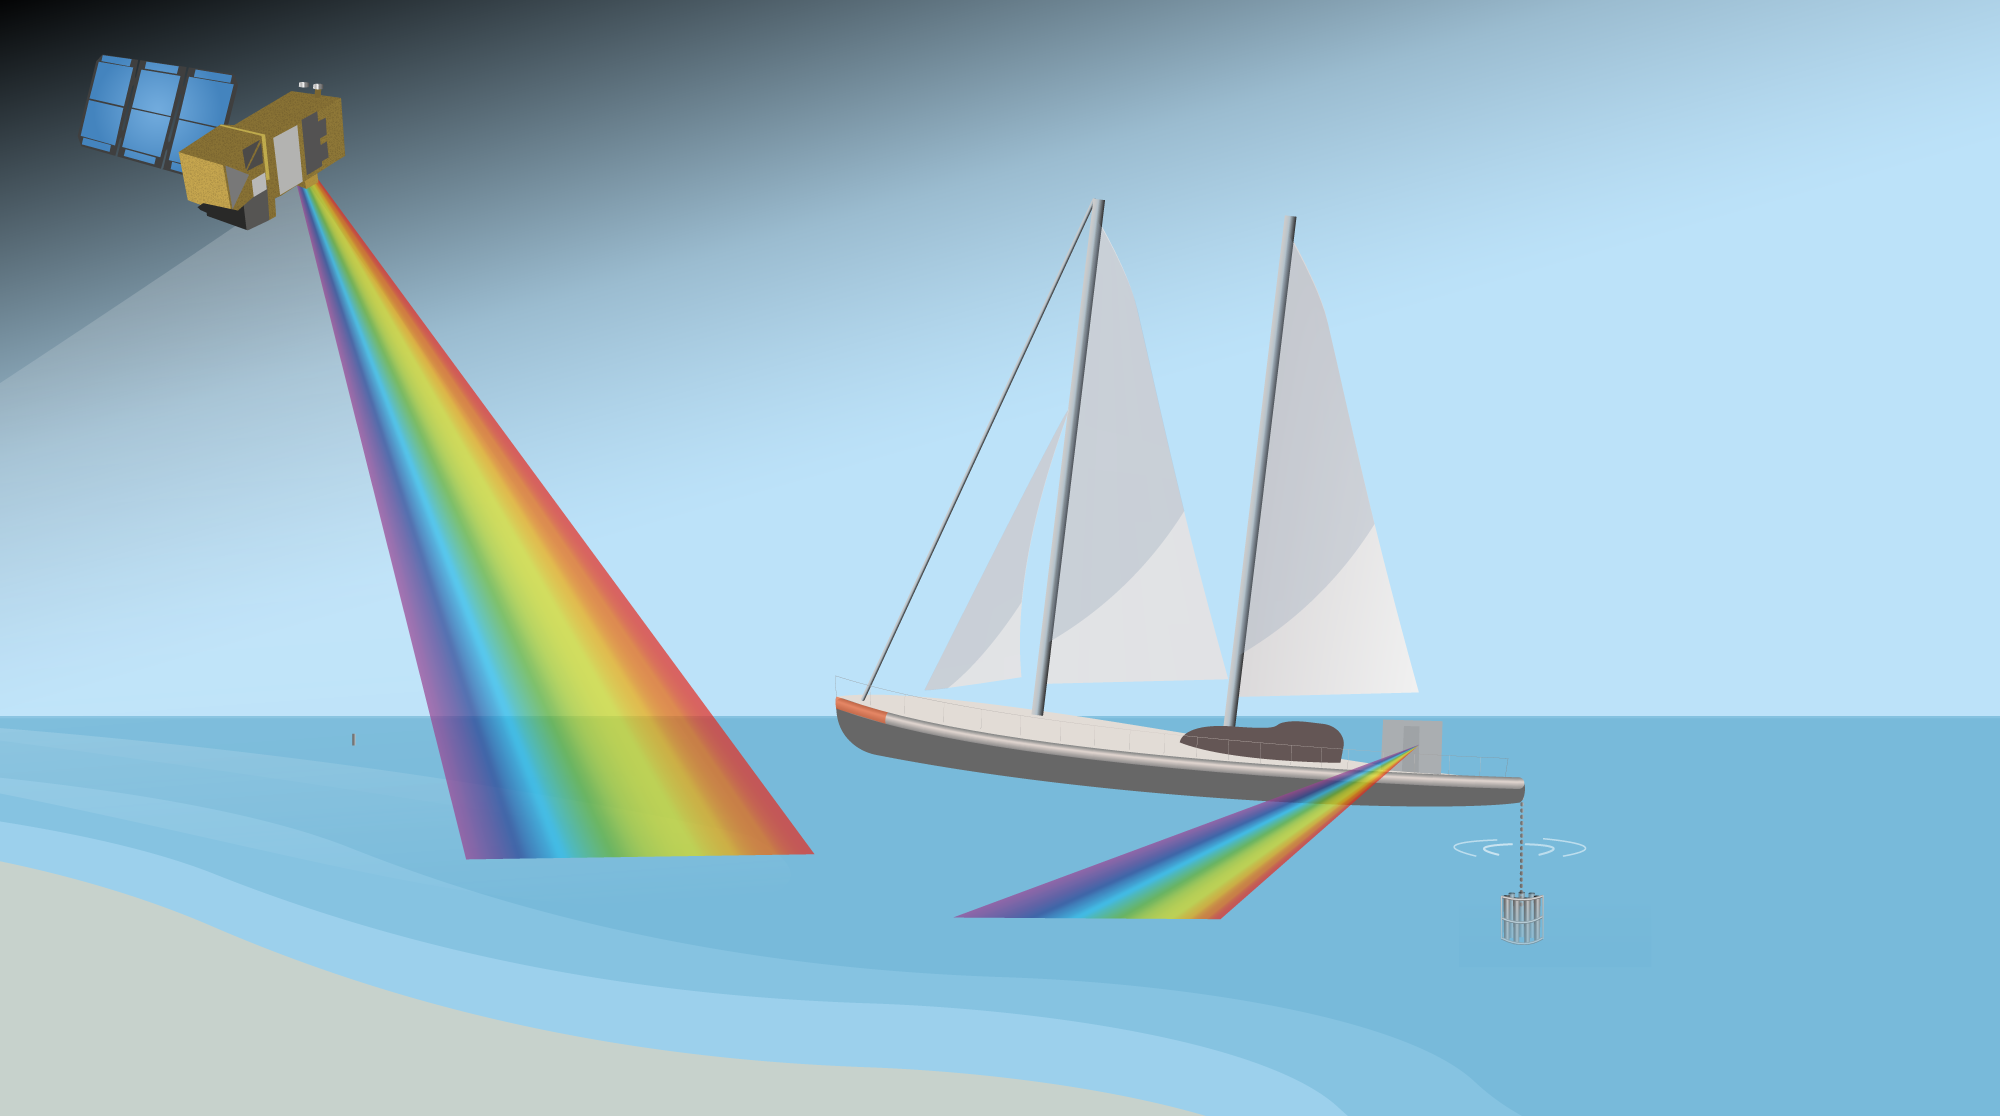 HyperBOOST Graphic showing the TARA schooner with a satellite above beaming a multicoloured beam (rainbow) down to the sea surface and another similar beam coming from the stern of the ship